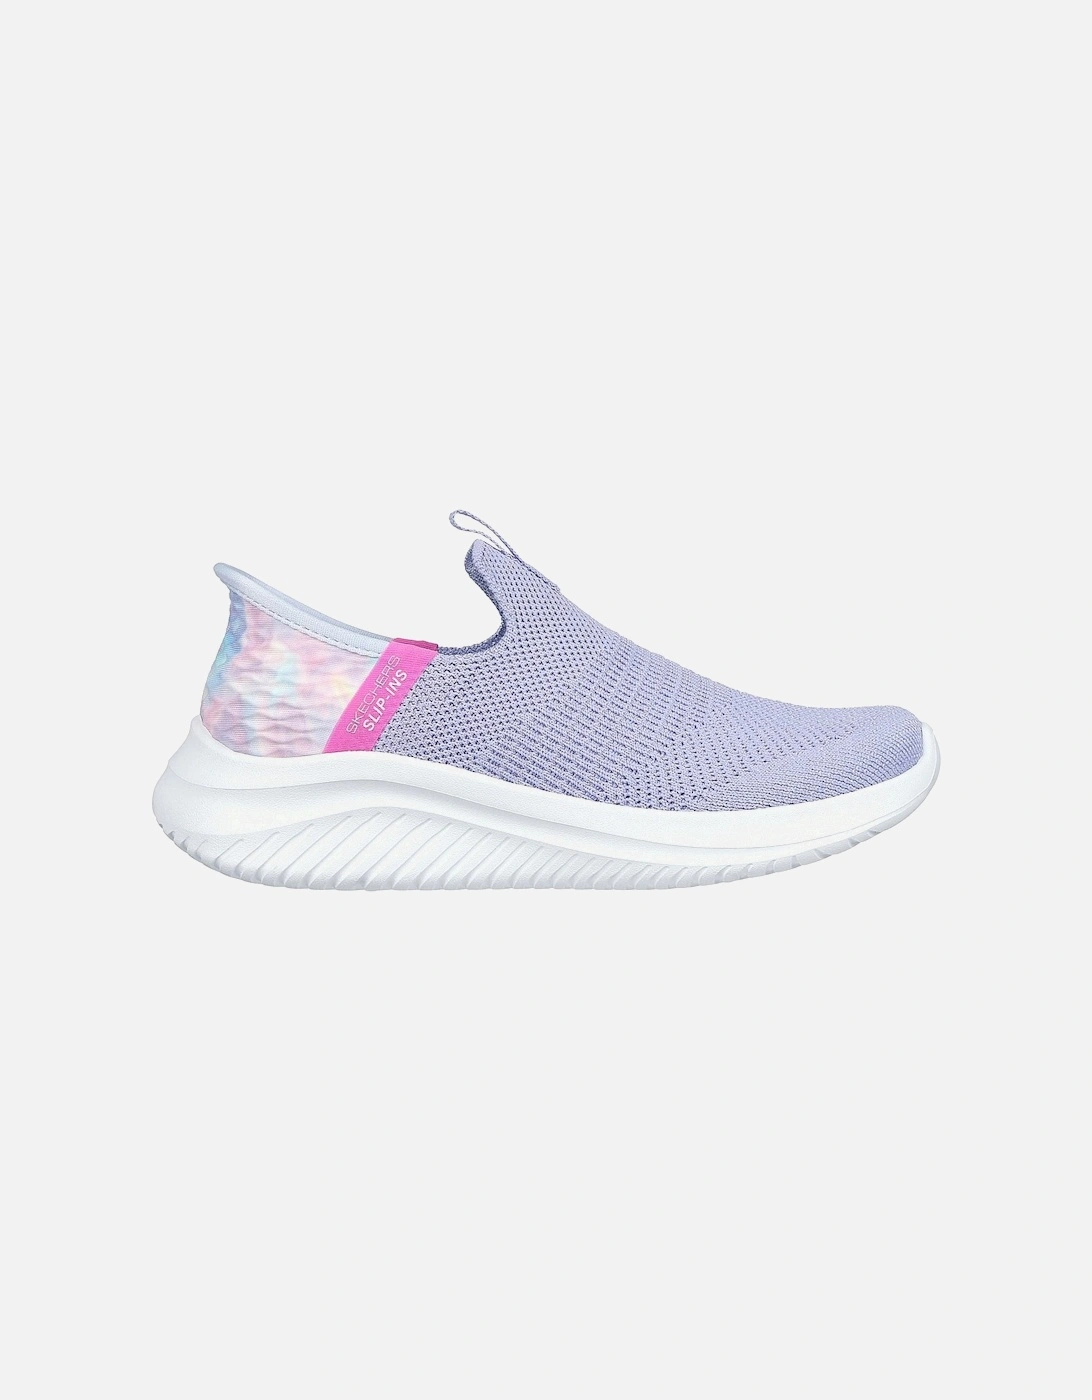 Girls Ultra Flex 3.0 - Colory Wild Trainers